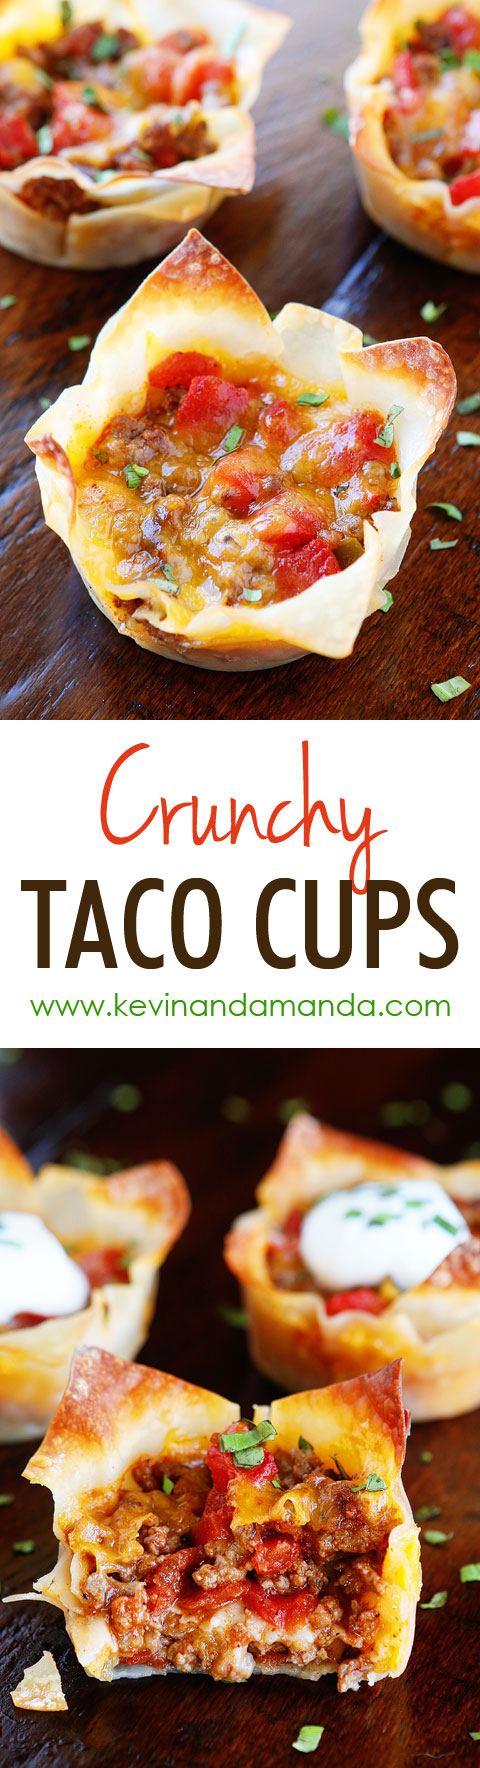 Crunchy Taco Cups — The Best Taco Recipe for Wonton Tacos!